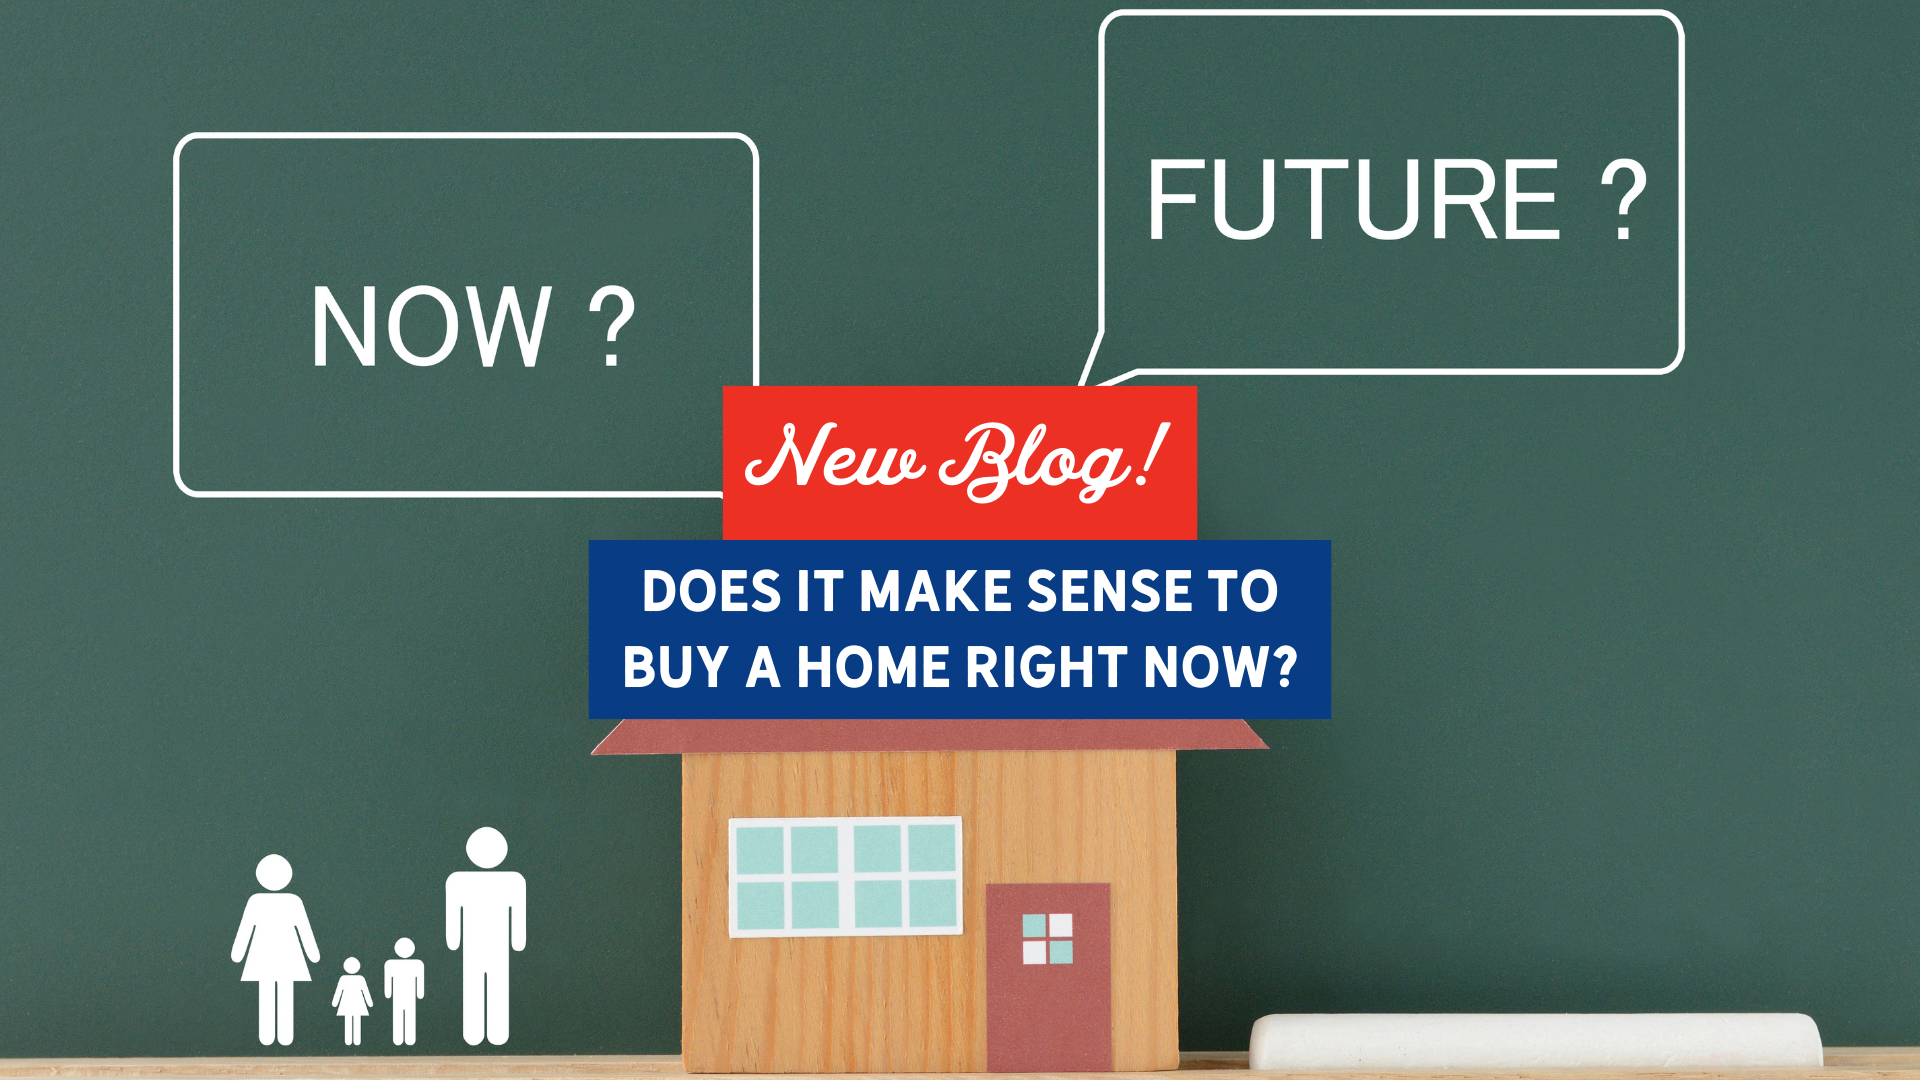 Does It Make Sense To Buy a Home Right Now?